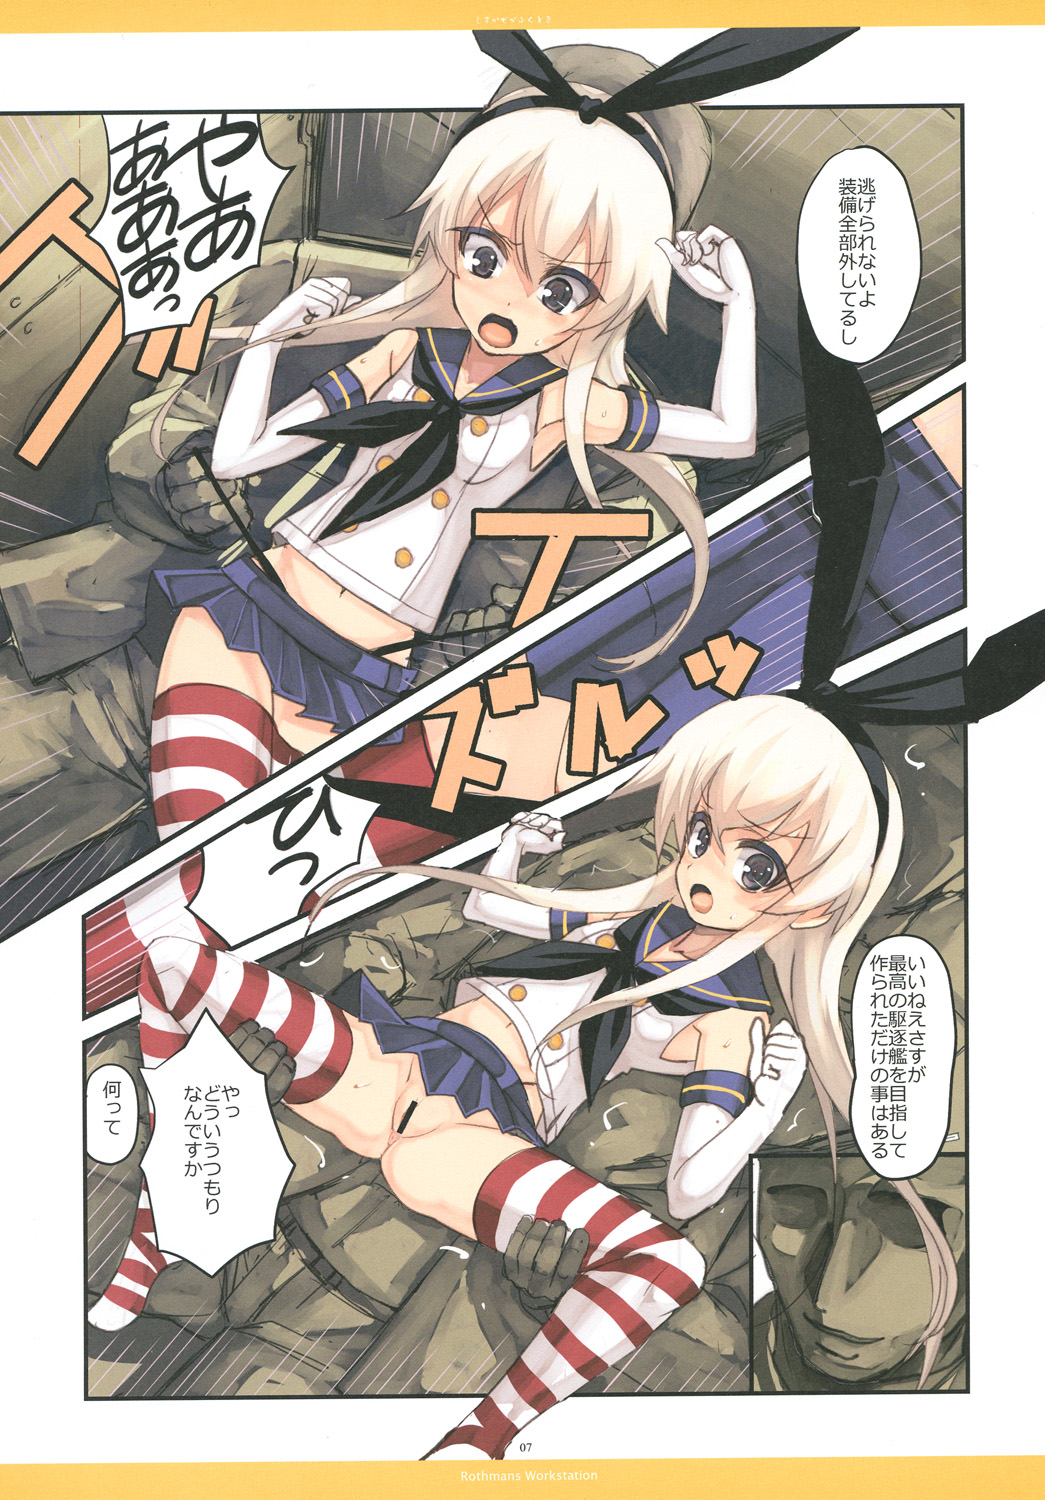 [R-WORKS (Roshuu Takehiro)] When the Simakaze Blows (Kantai Collection -KanColle-) [Digital] page 6 full